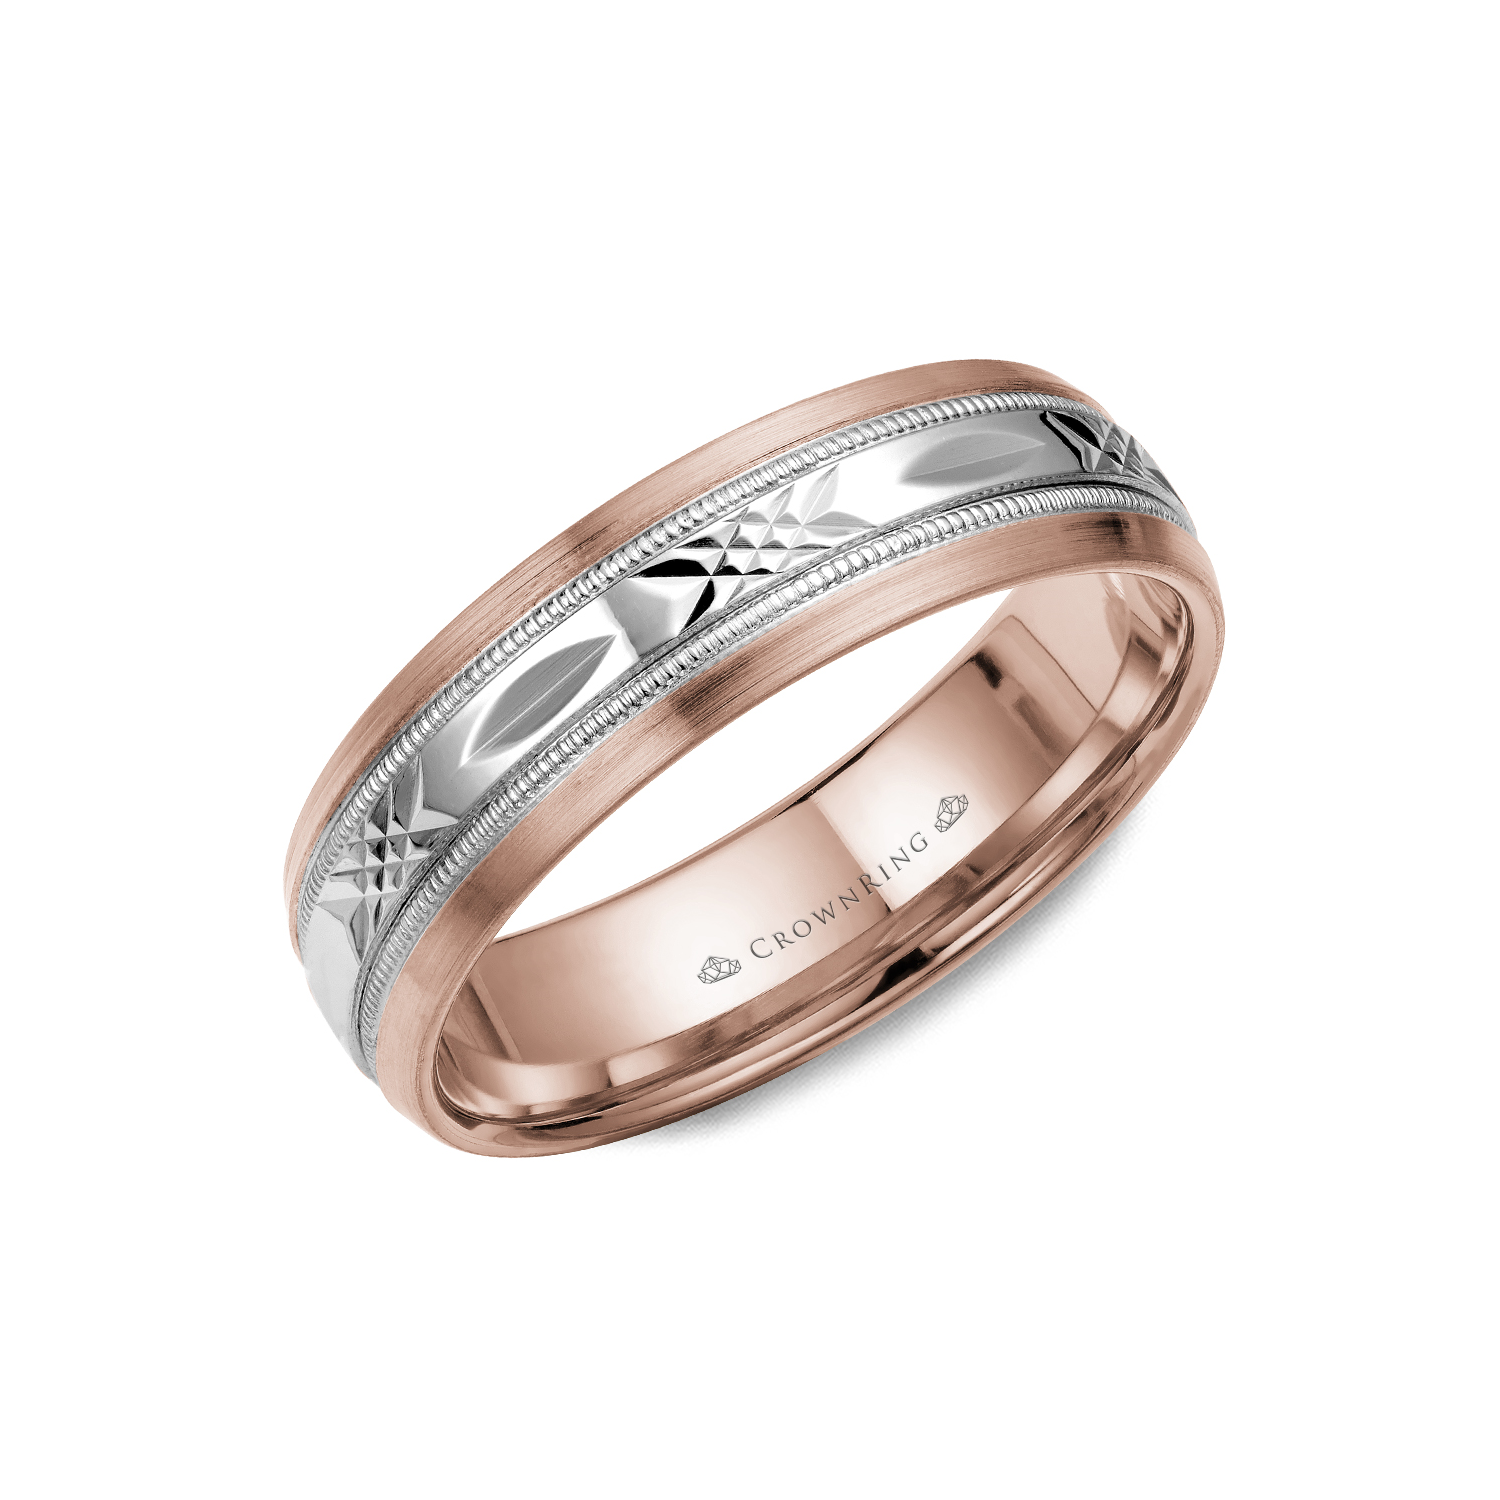 6mm Classic Wedding Band Carved With High Polish Finish & Sandpaper Edges